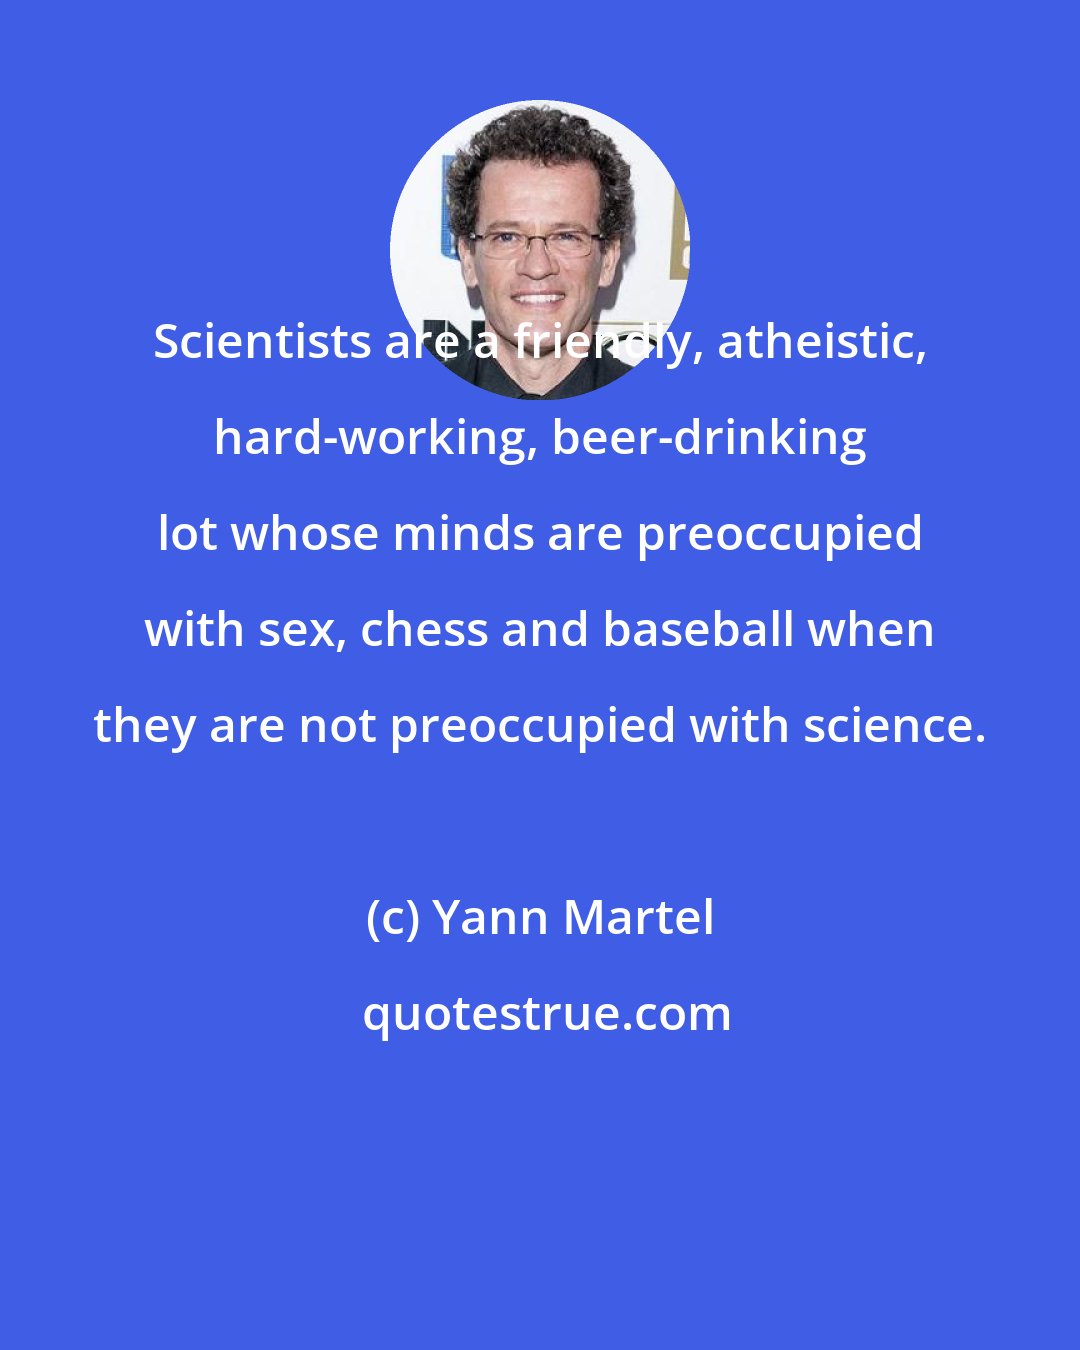 Yann Martel: Scientists are a friendly, atheistic, hard-working, beer-drinking lot whose minds are preoccupied with sex, chess and baseball when they are not preoccupied with science.